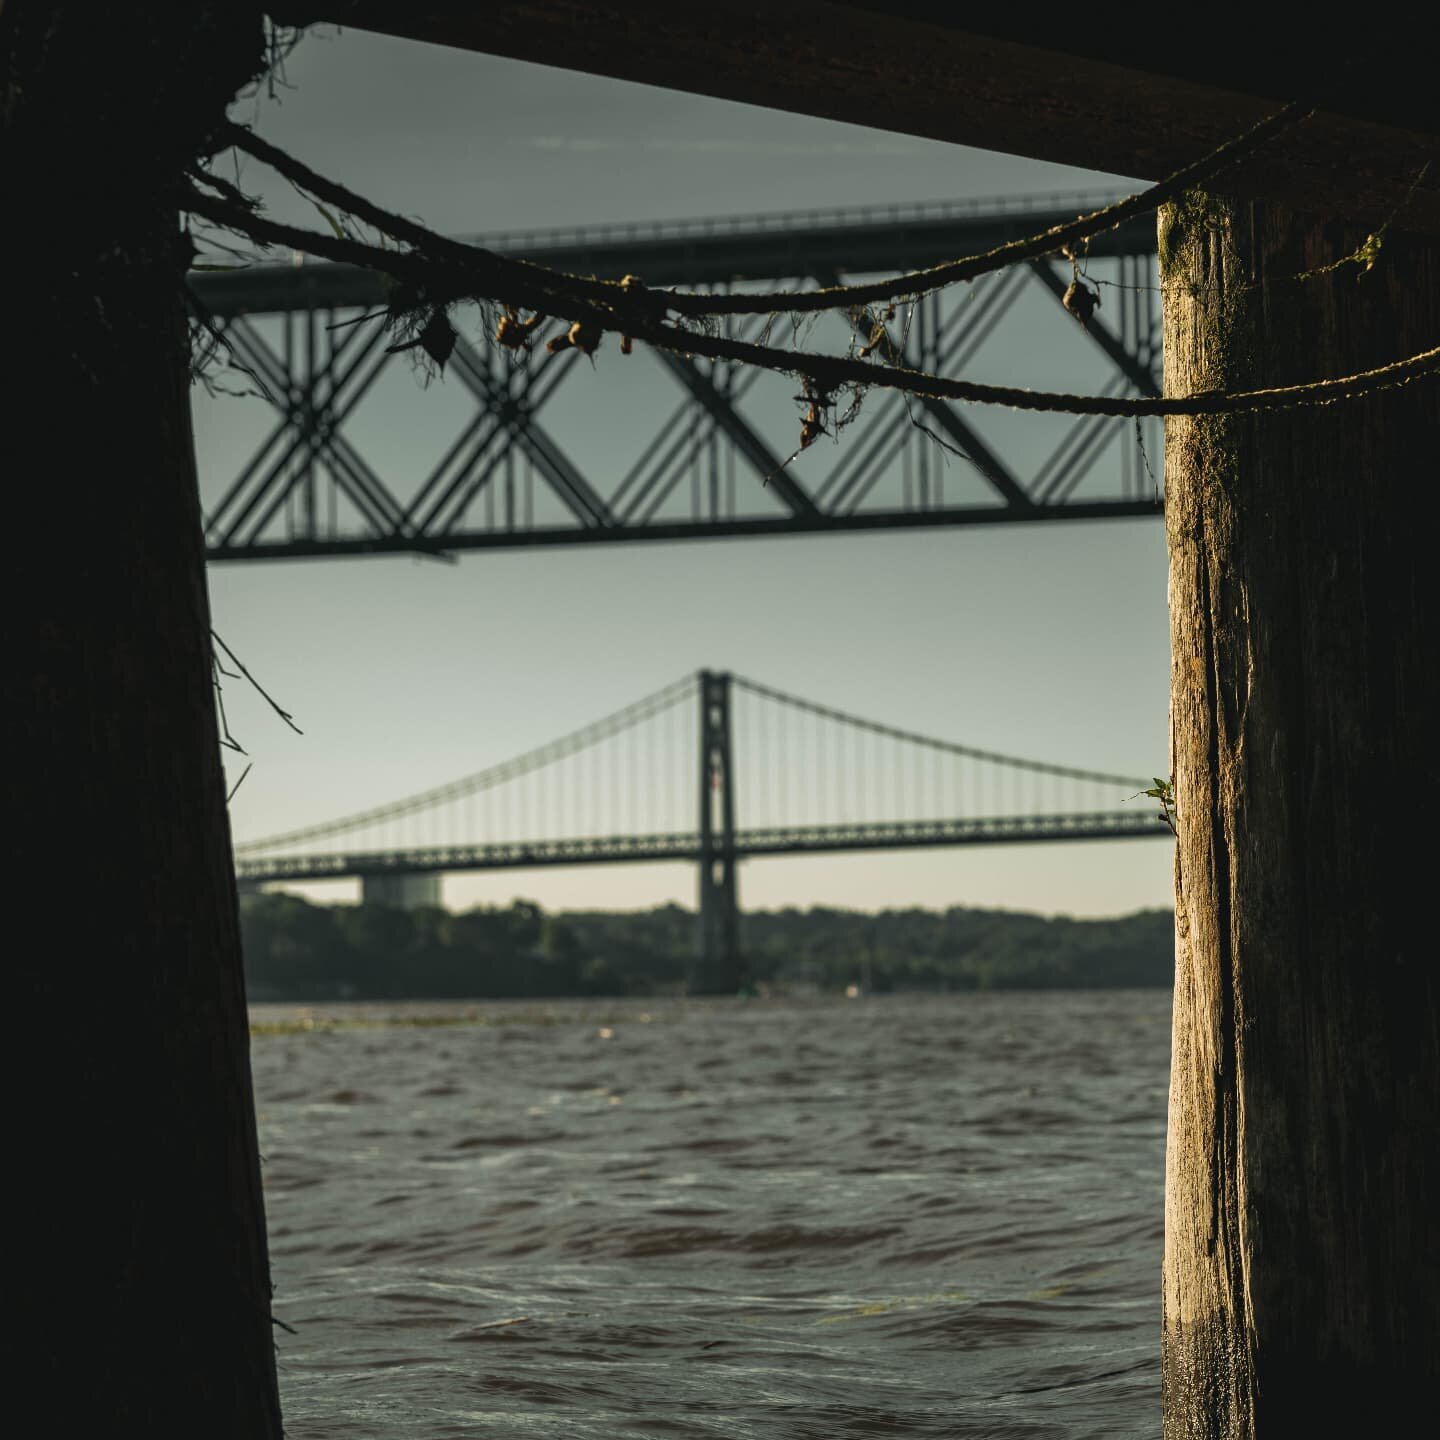 (Framed) I have been told that this photo is trash, what do you think?

#nikon #newyork #lensculture #photographylife #hudsonvalley #noir #streettogether #streetspecialist #streetcollective #bridgepic #water #upstateny #lowtide #photogram #picoftheda